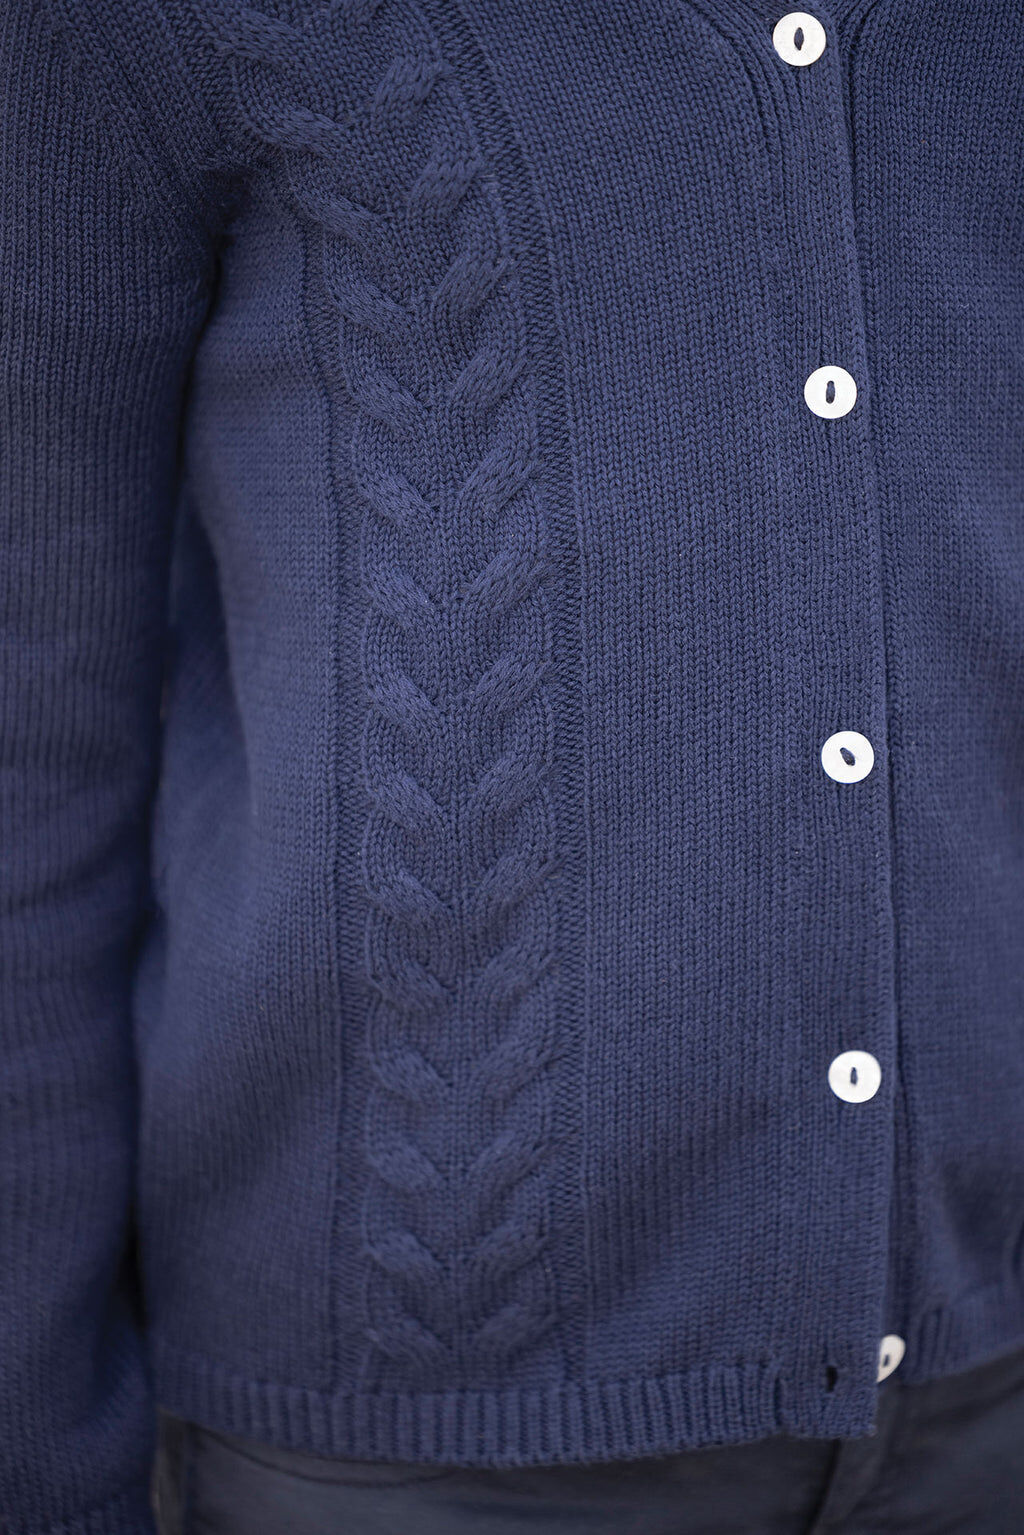 Cardigan - Navy Cable